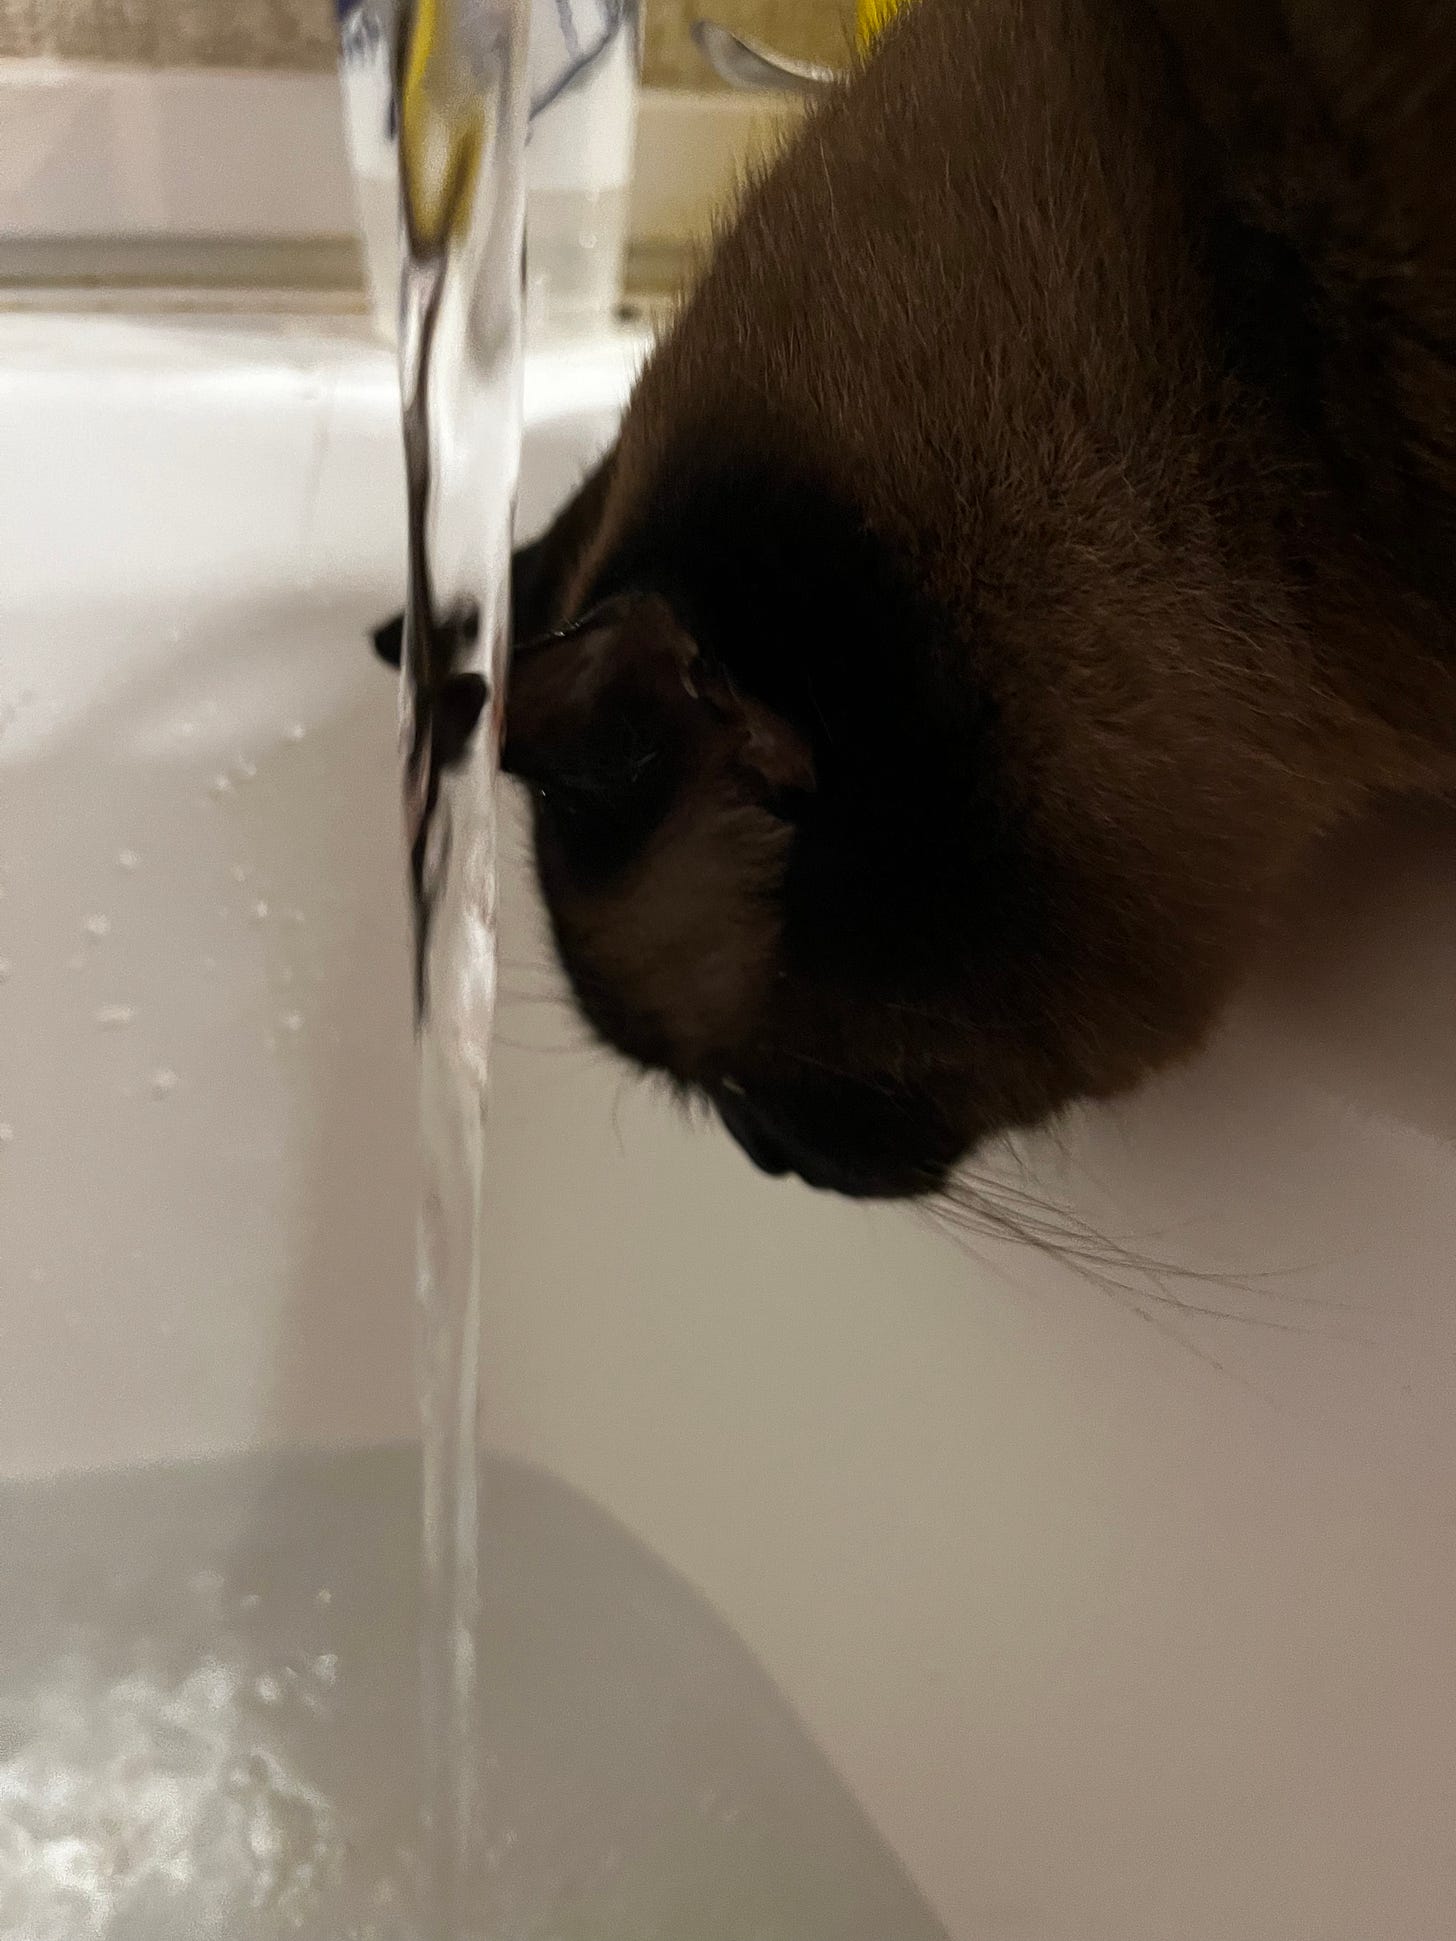 Siamese cat playing in the bathtub faucet